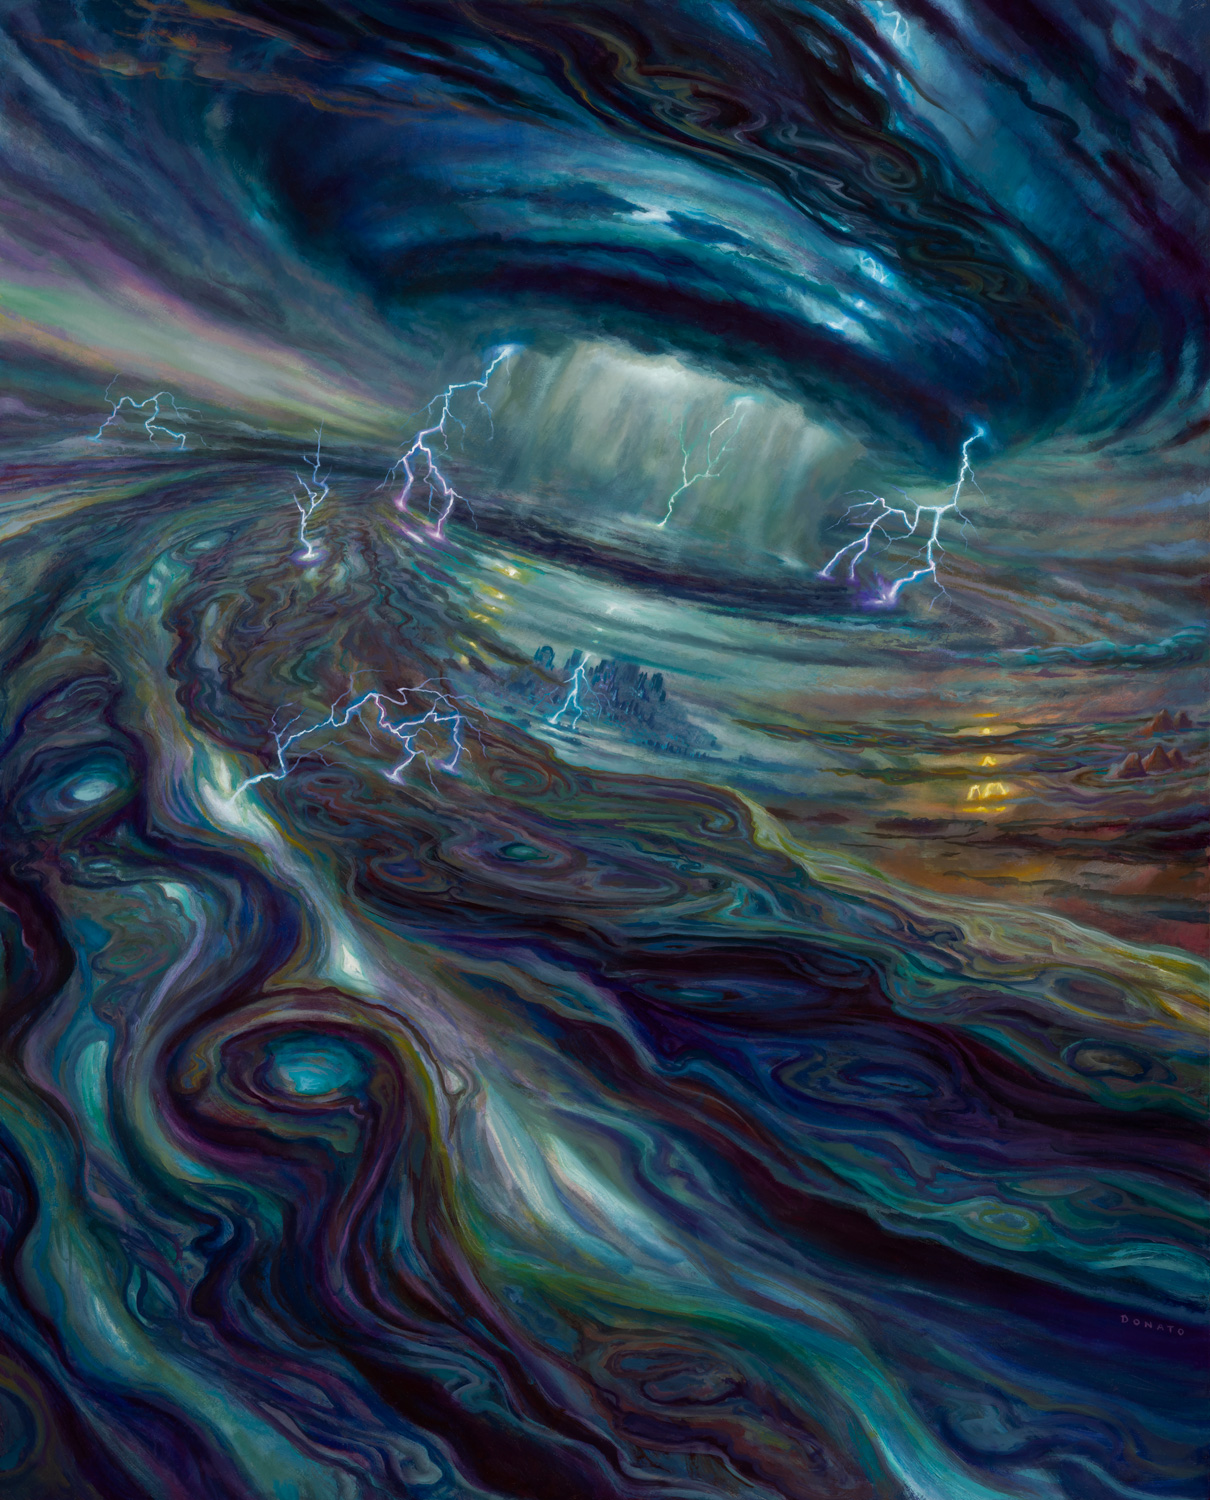 Thousand Year Storm
Double Masters 2022
30" x 24"  Oil on Panel 2021
private collection